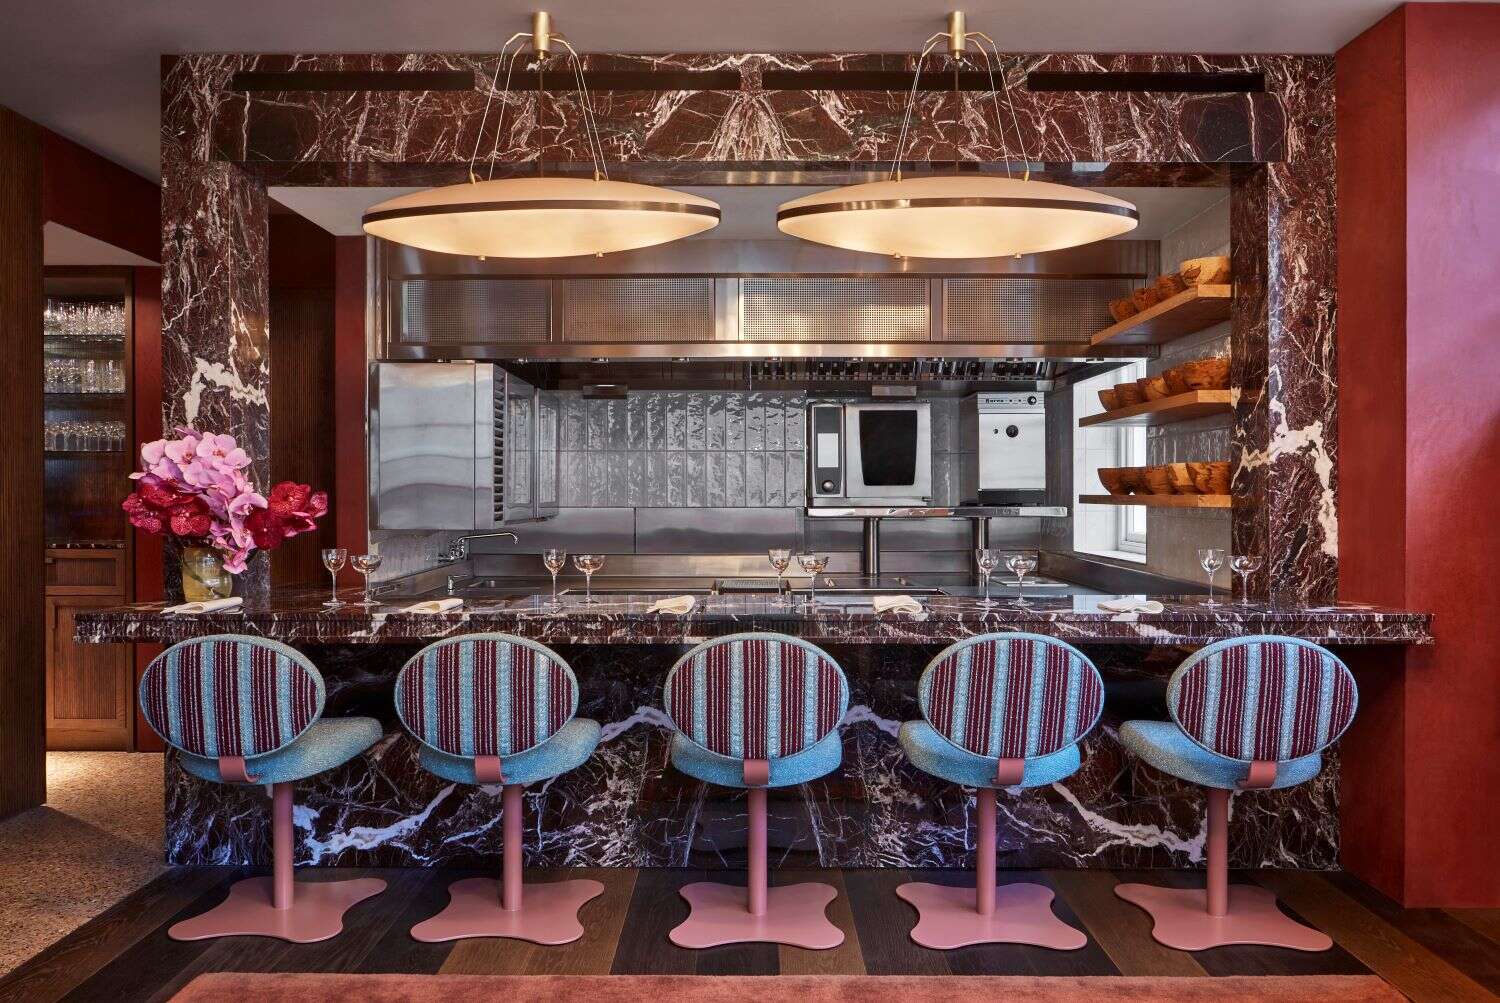 Dining gets Personal at Muse by Tom Aikens